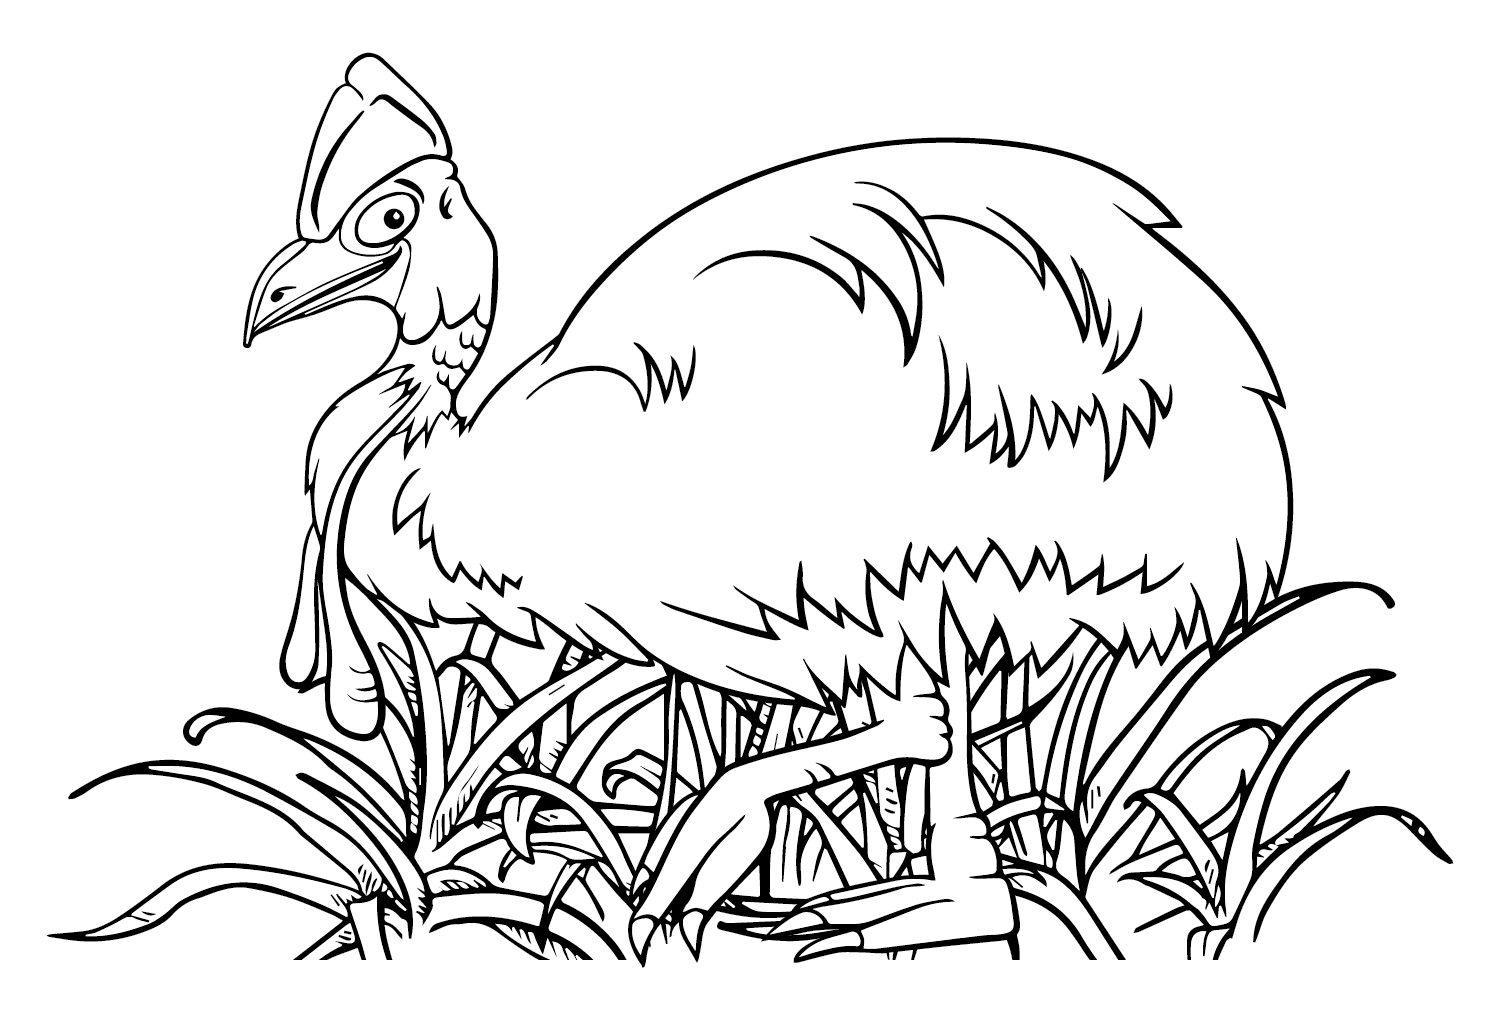 Cassowary Coloring Page Printable from Cassowary